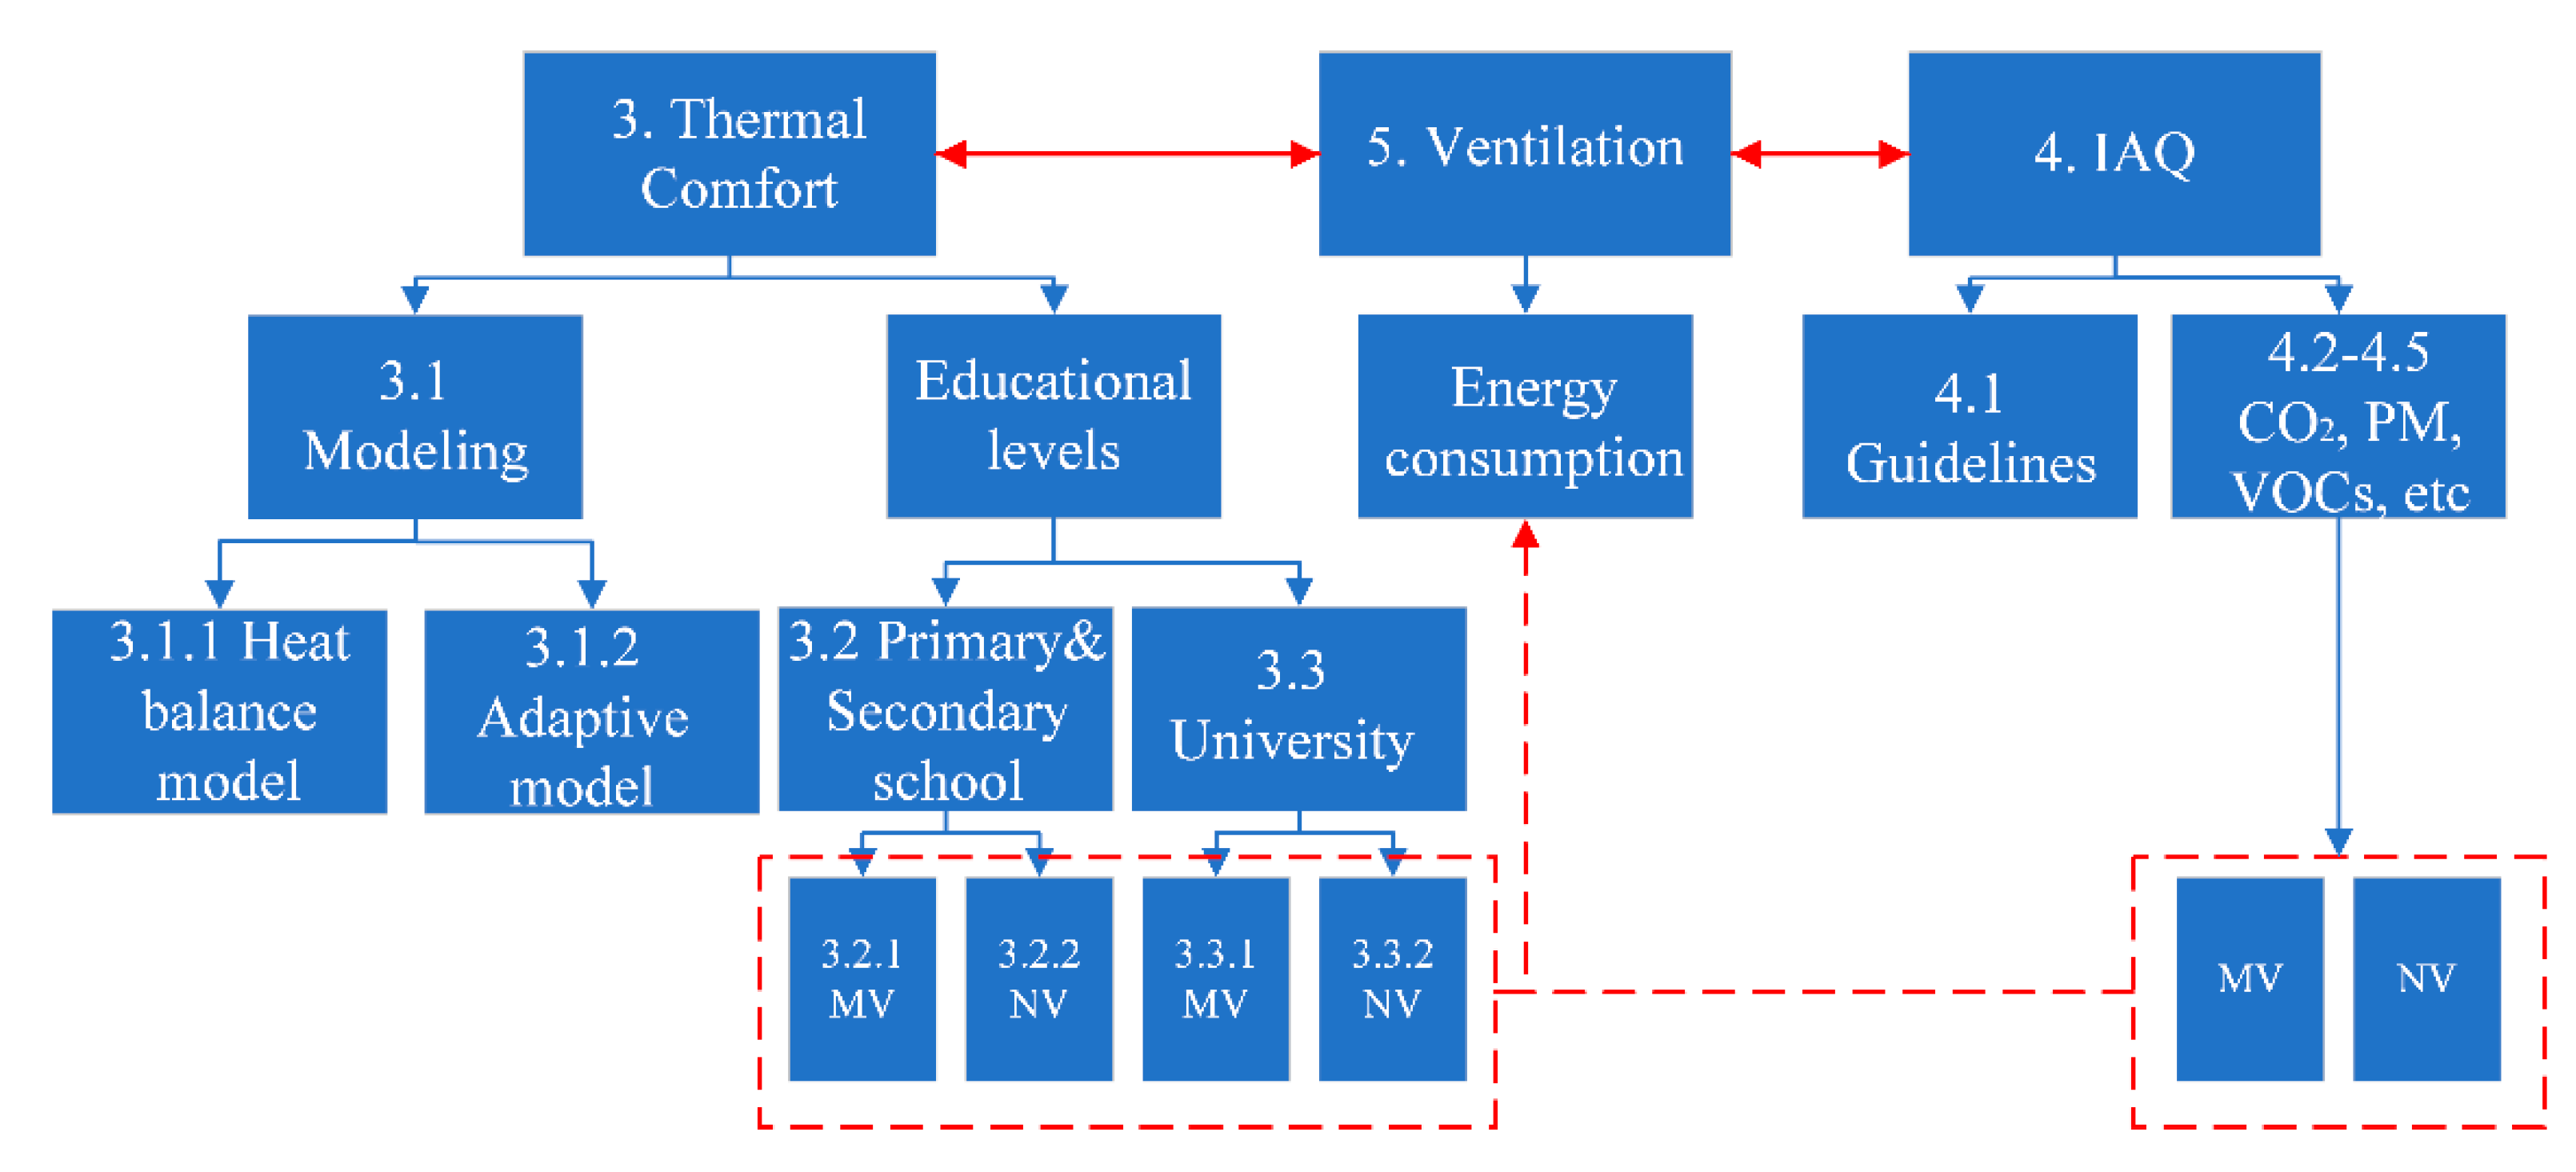 What are the considerations for comfort cooling in city-based